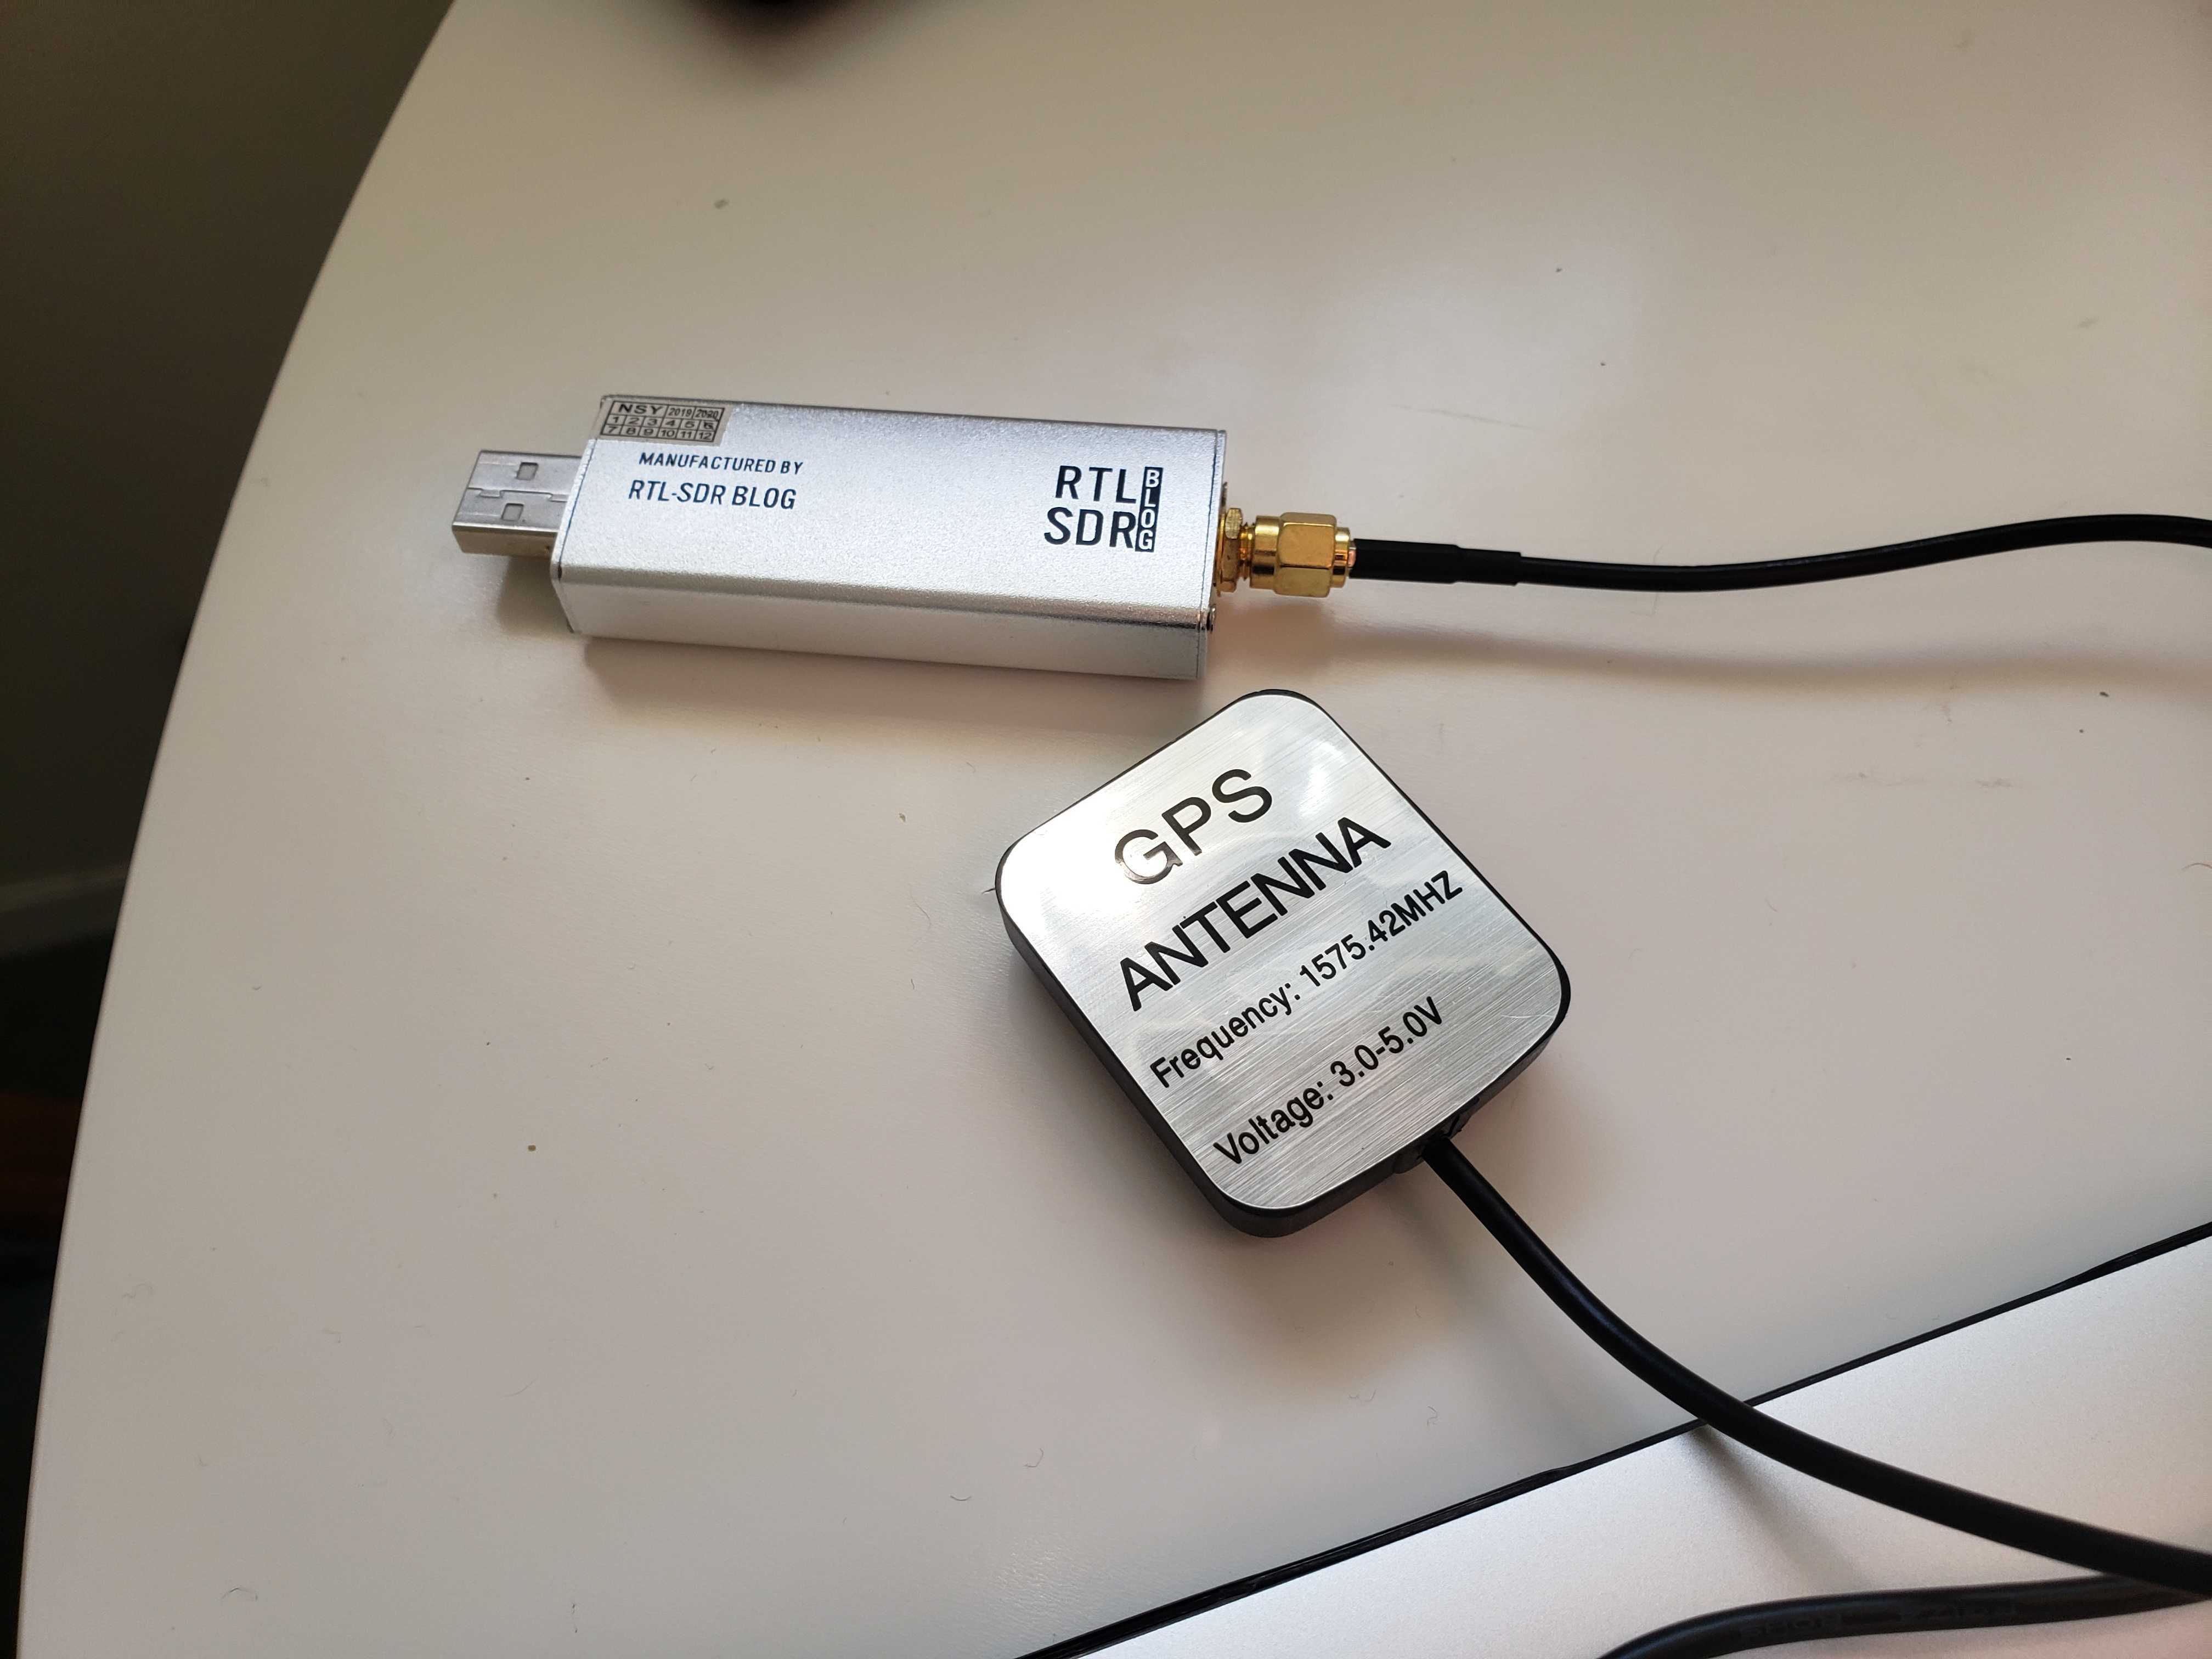 Antenna and RTL-SDR dongle